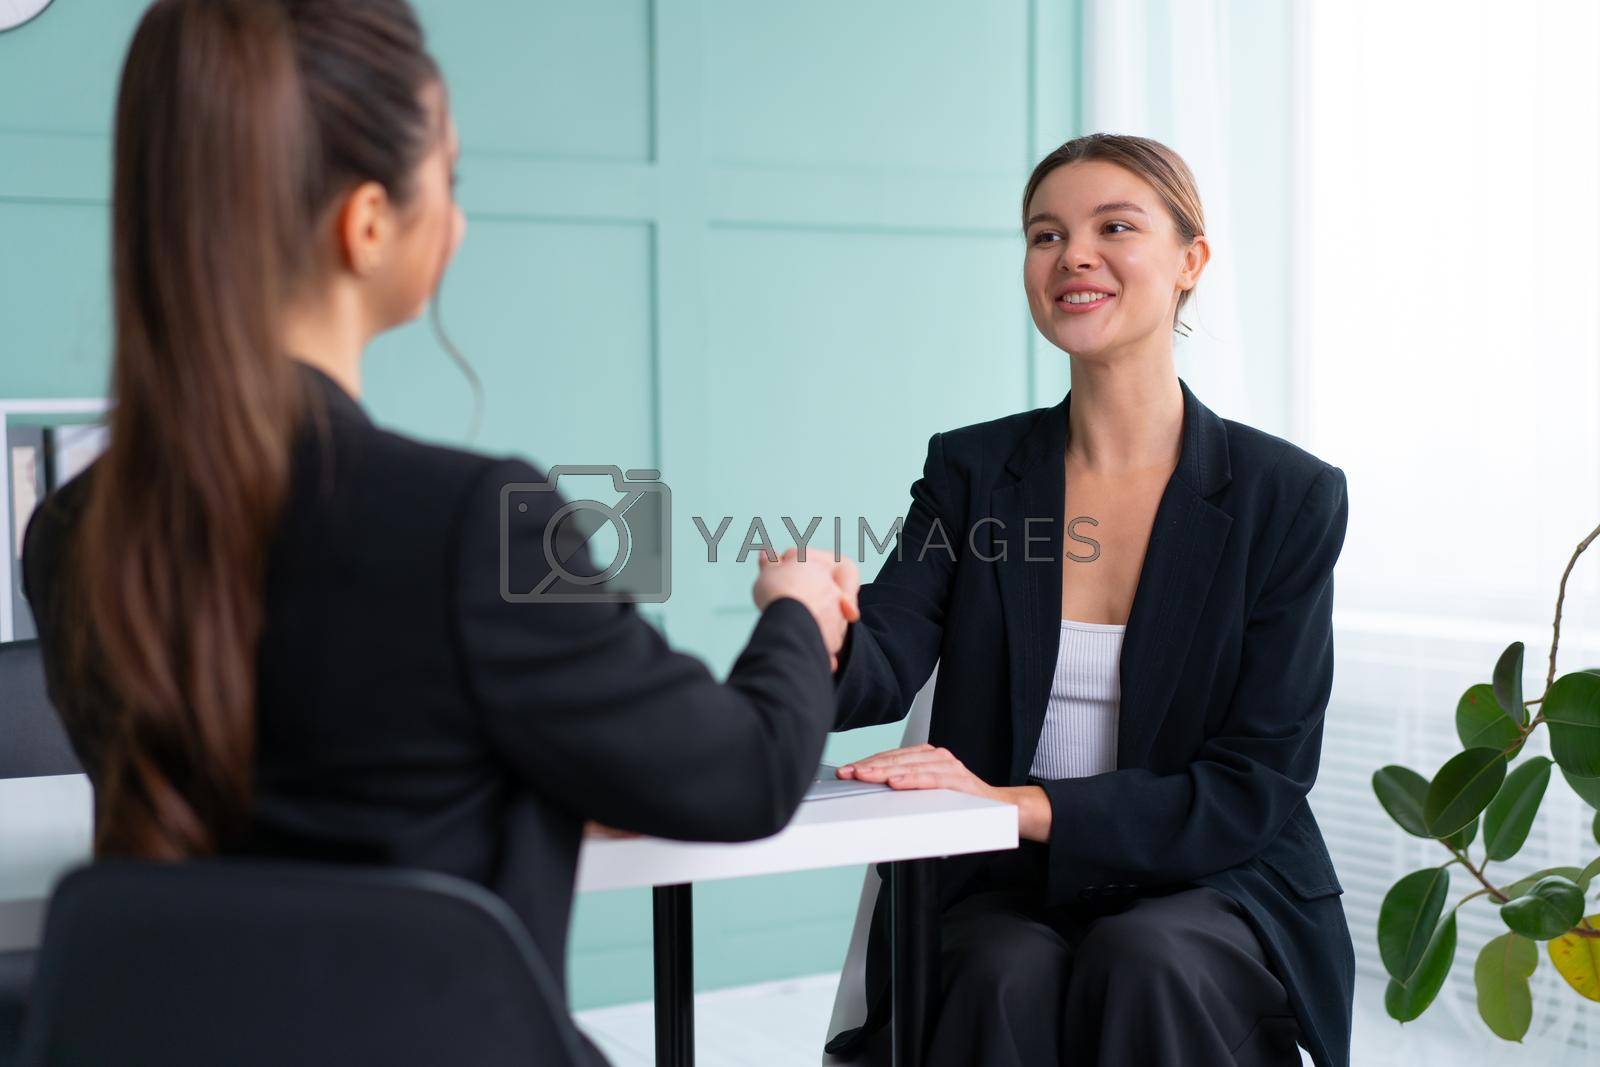 Royalty free image of Job interview. Business, career and placement concept. Young blonde woman handshaking candidate hand, while sitting in front of candidate during corporate meeting or job interview by andreonegin